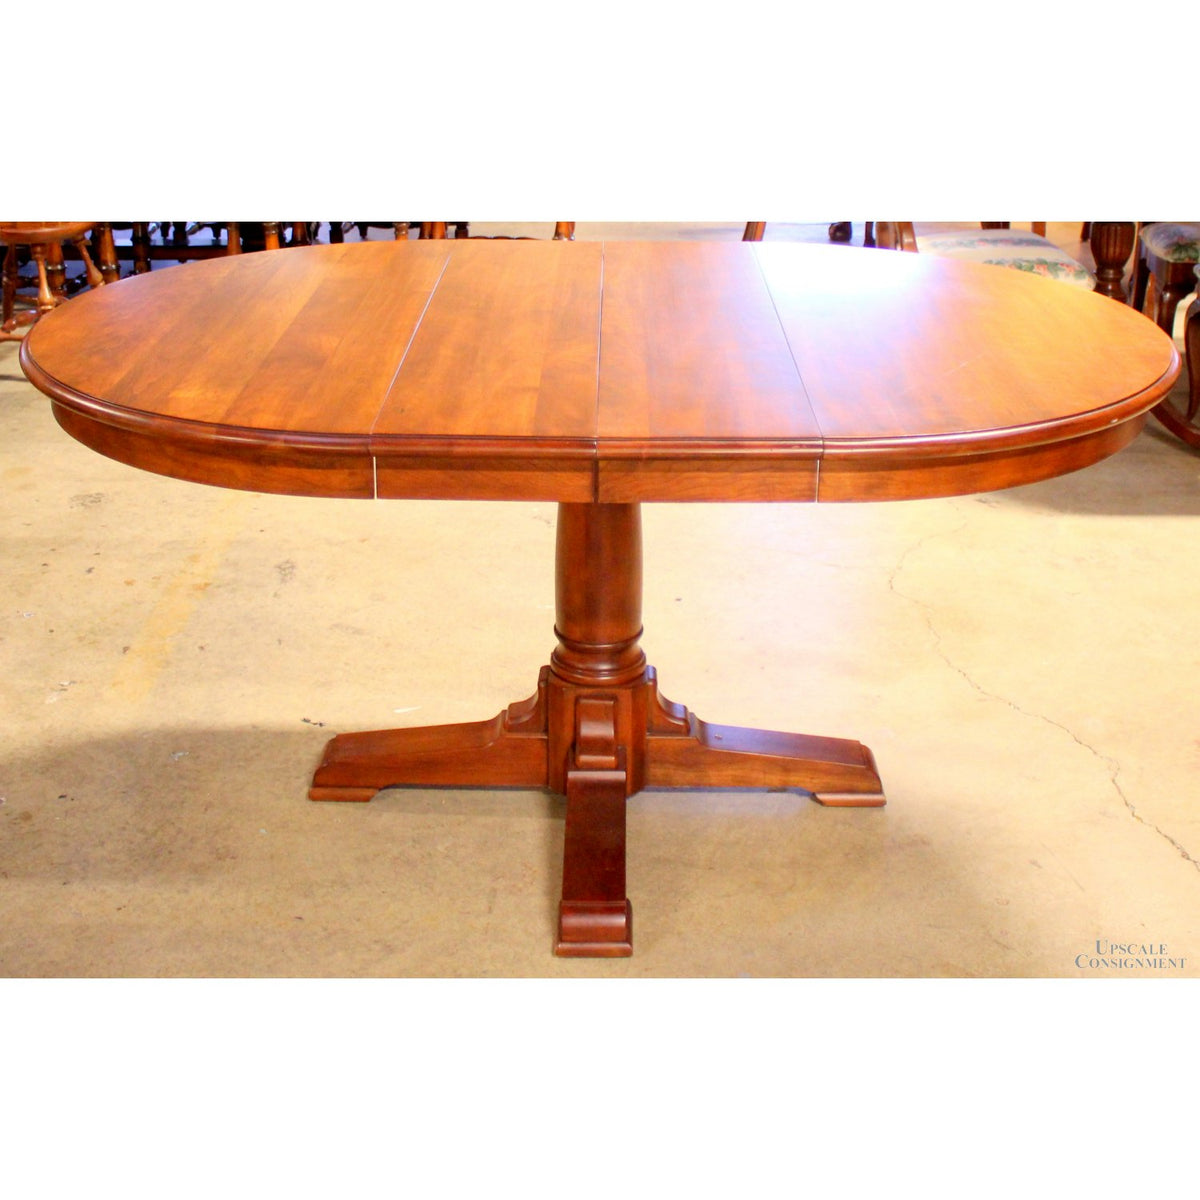 Stickley Dining Table W/6 Chairs